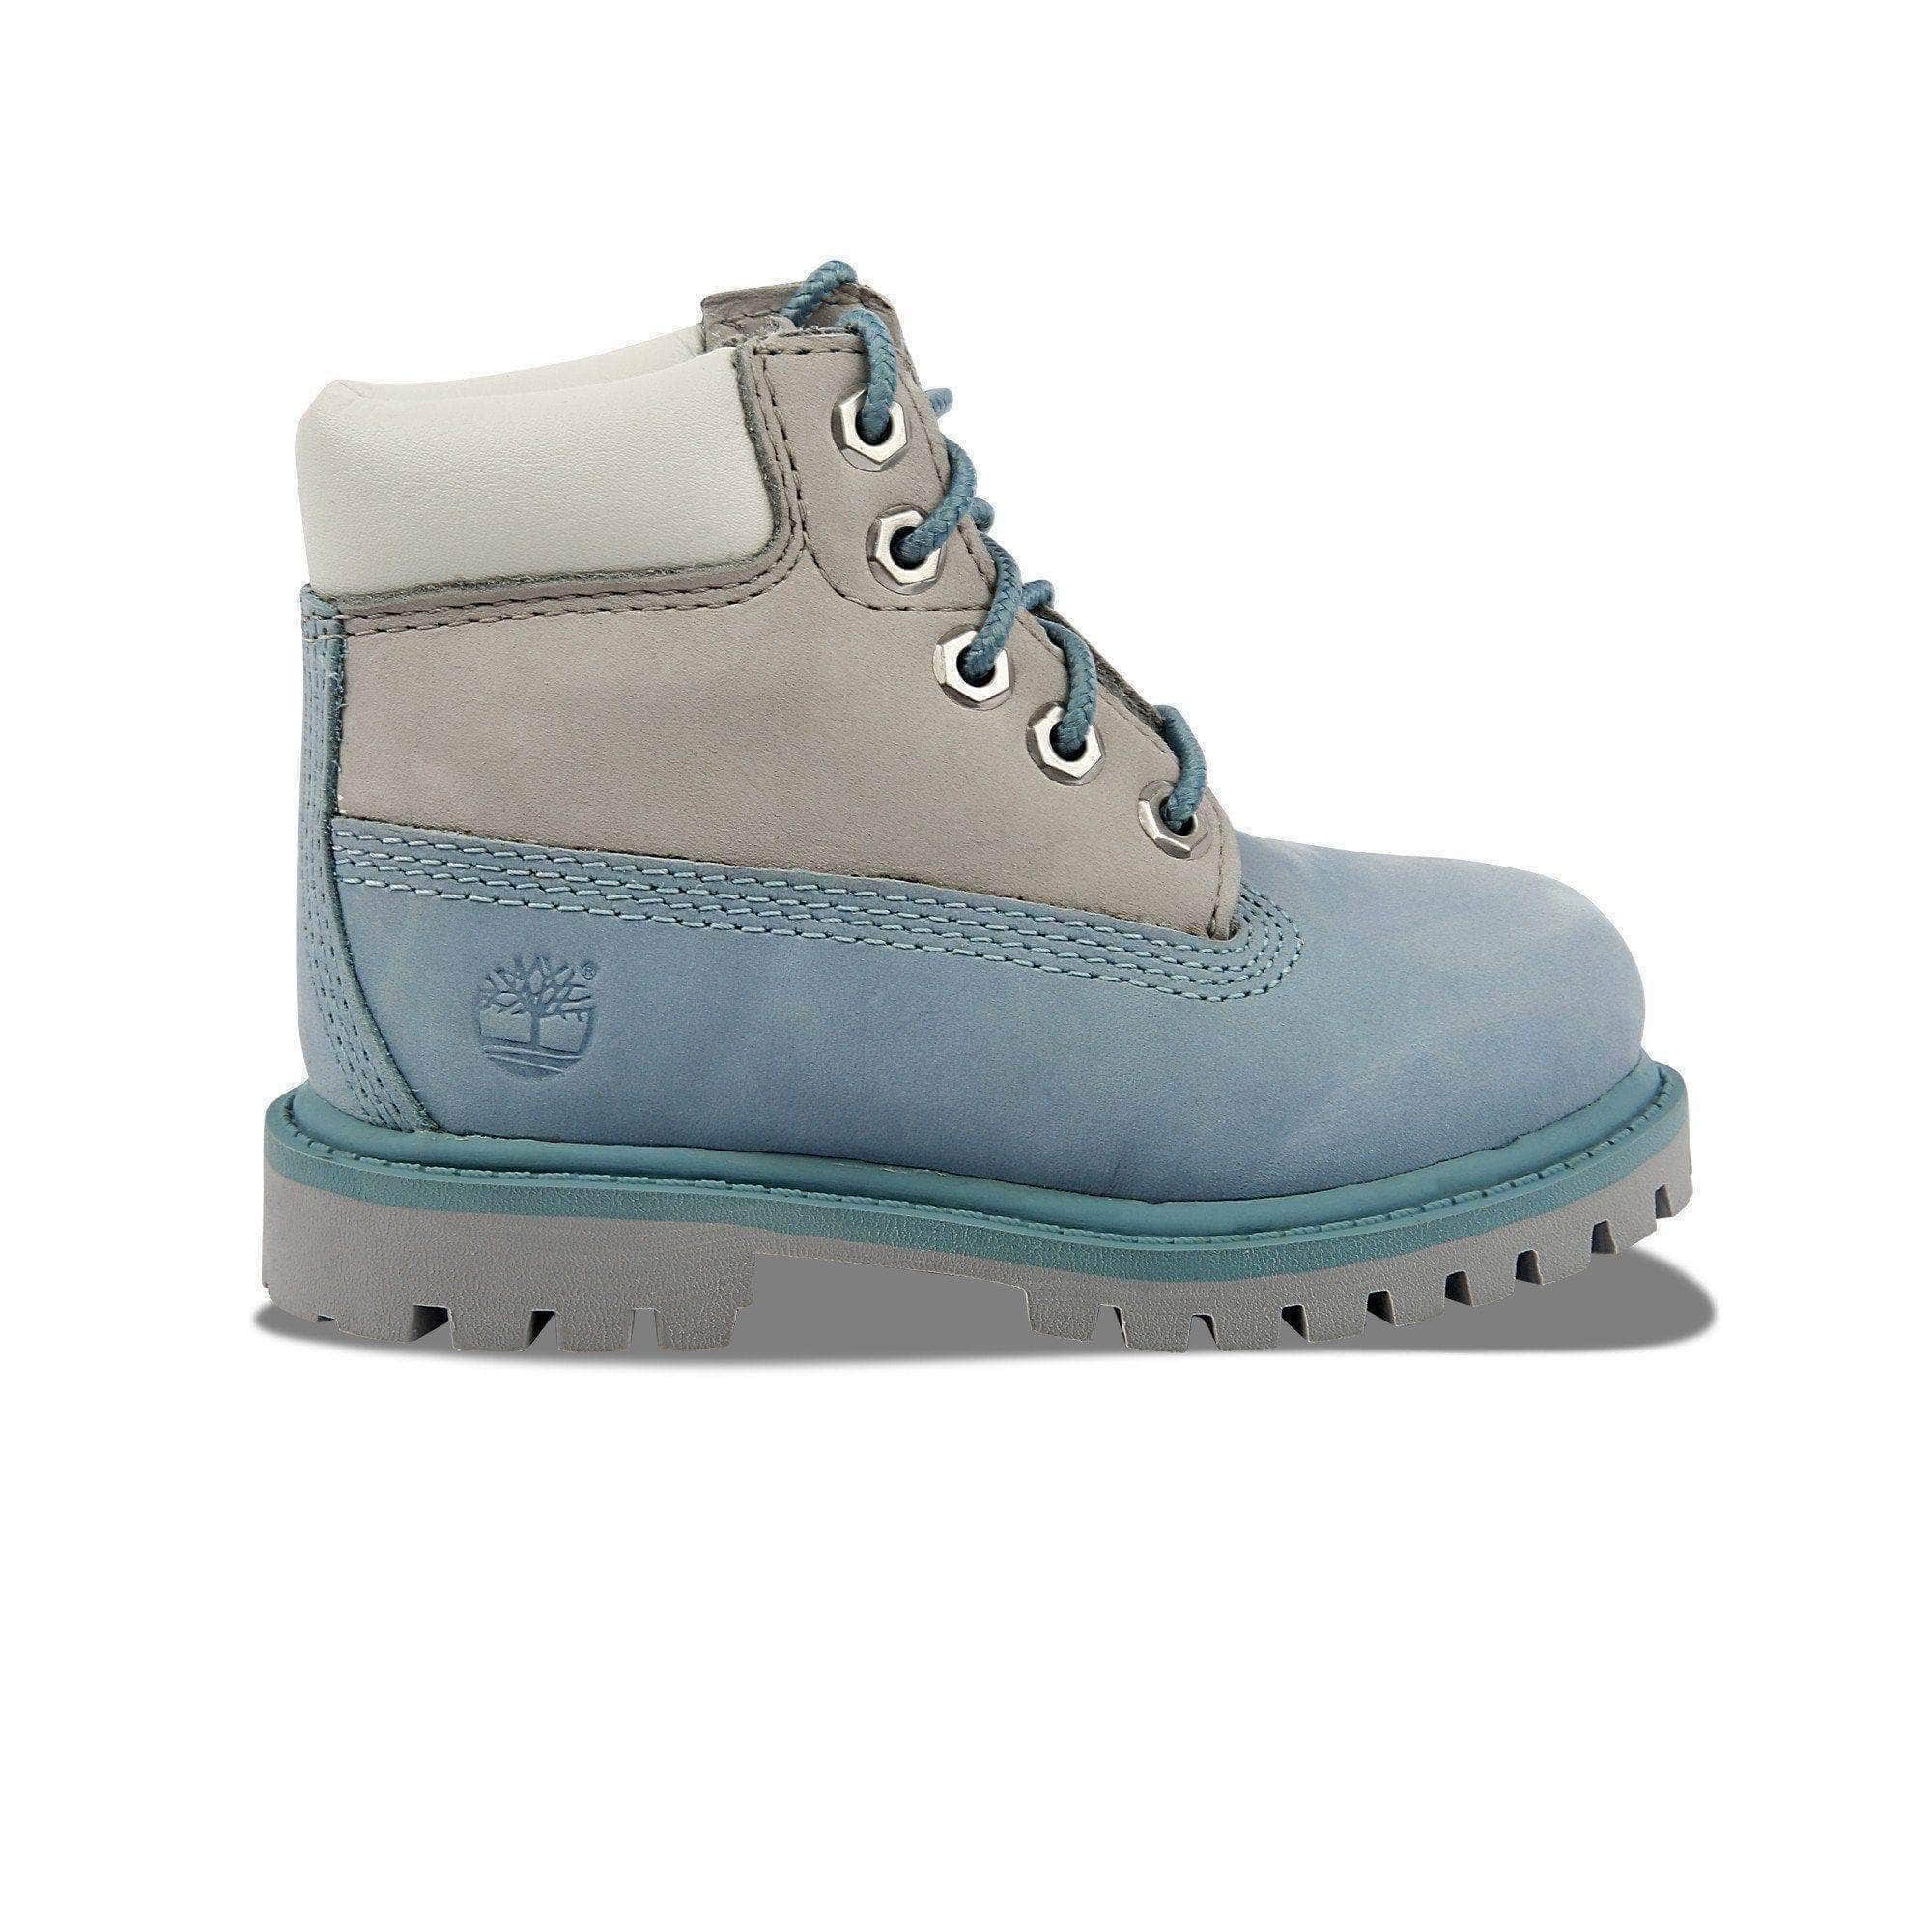 Timberland 6 Inch Premium Waterproof Boots - Toddlers